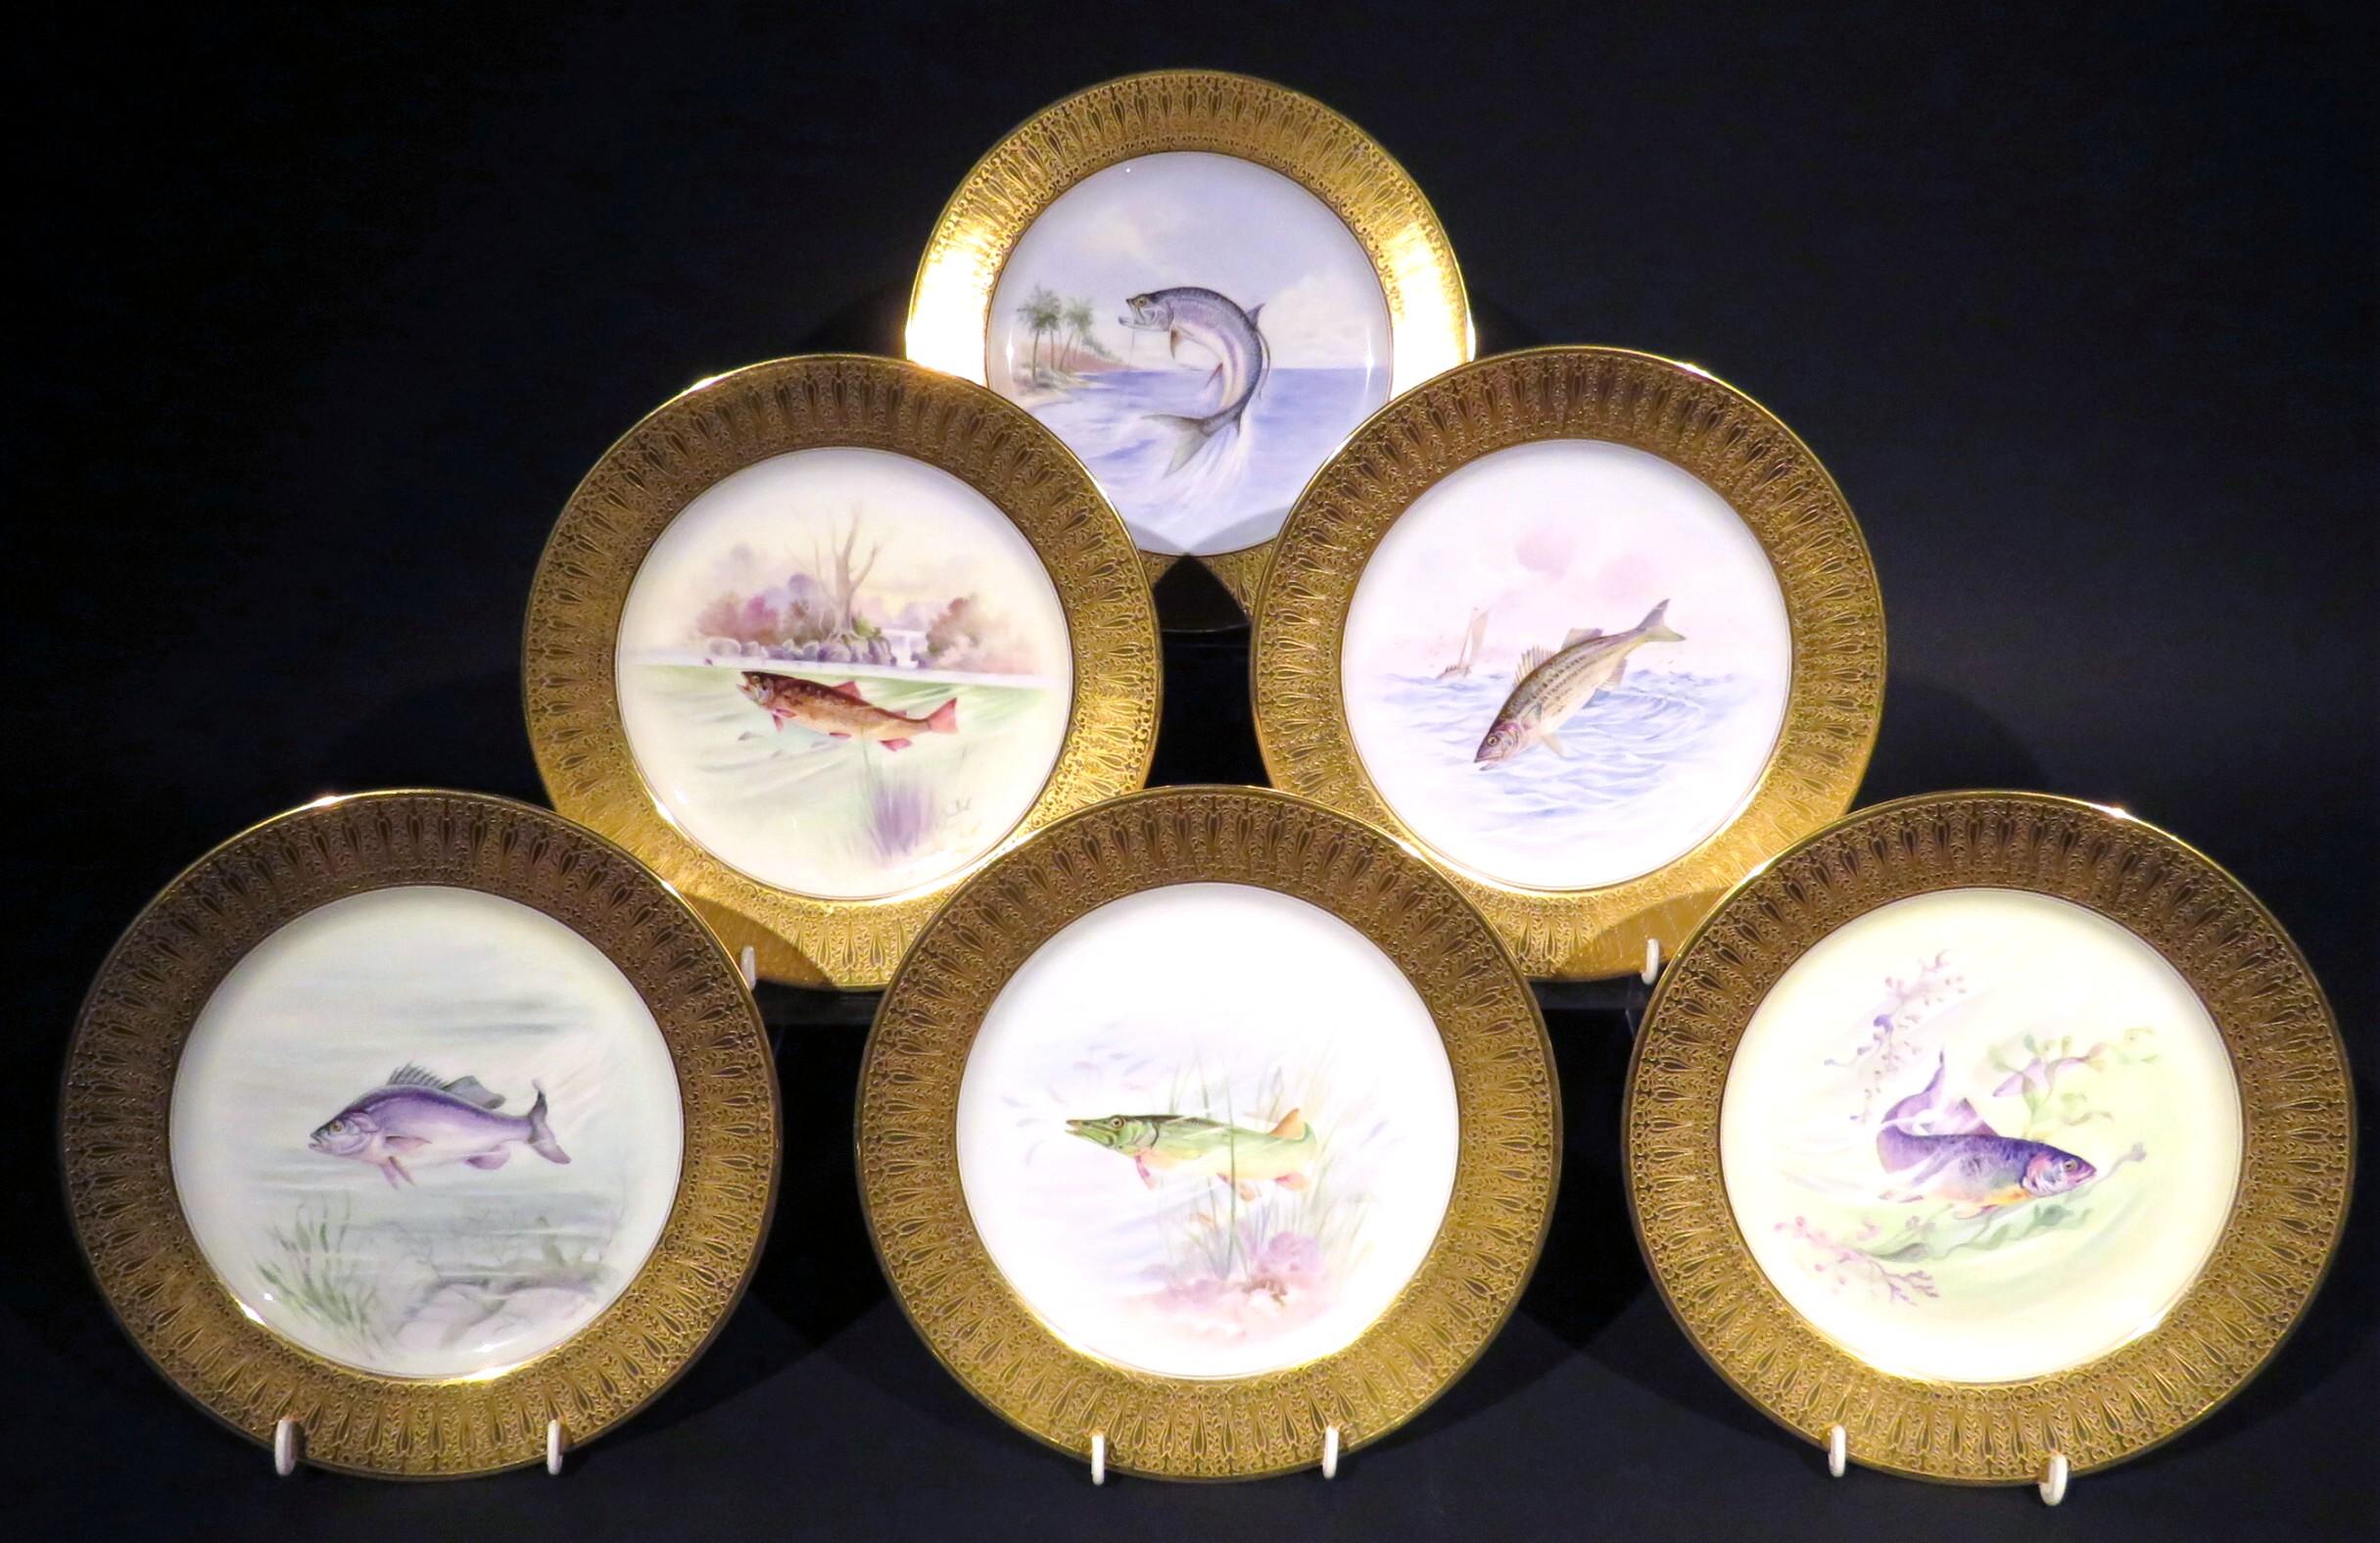 An exquisite set of six hand painted Lenox porcelain cabinet plates by artist Eugene DeLan (working 1896-1915), previously retailed by Tiffany & Co. Each plate showing a richly embossed gilt border surrounding a central field decorated with a